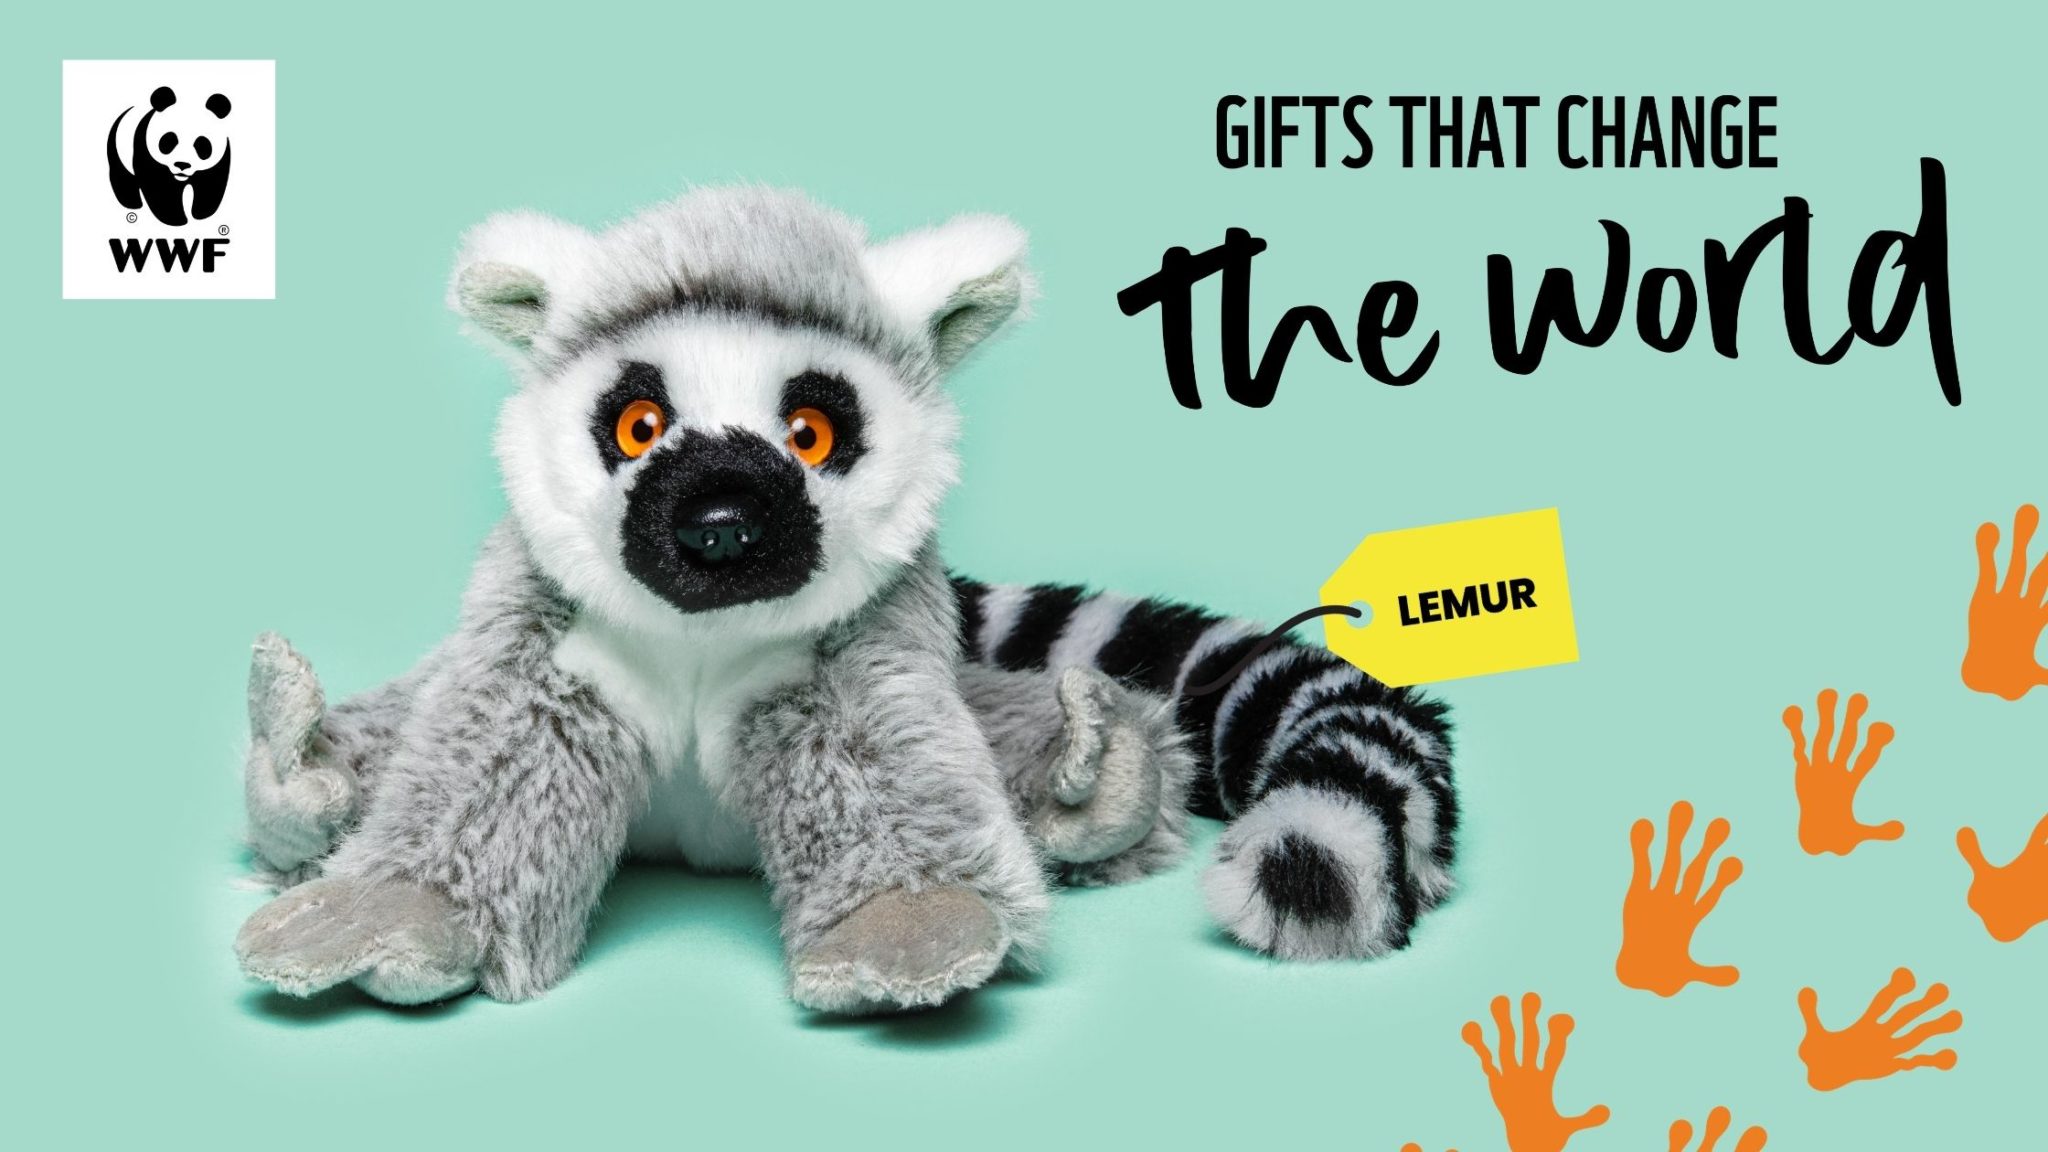 Wwf Canada Releases Four New Species To Symbolically Adopt This Holiday Season Wwf Ca